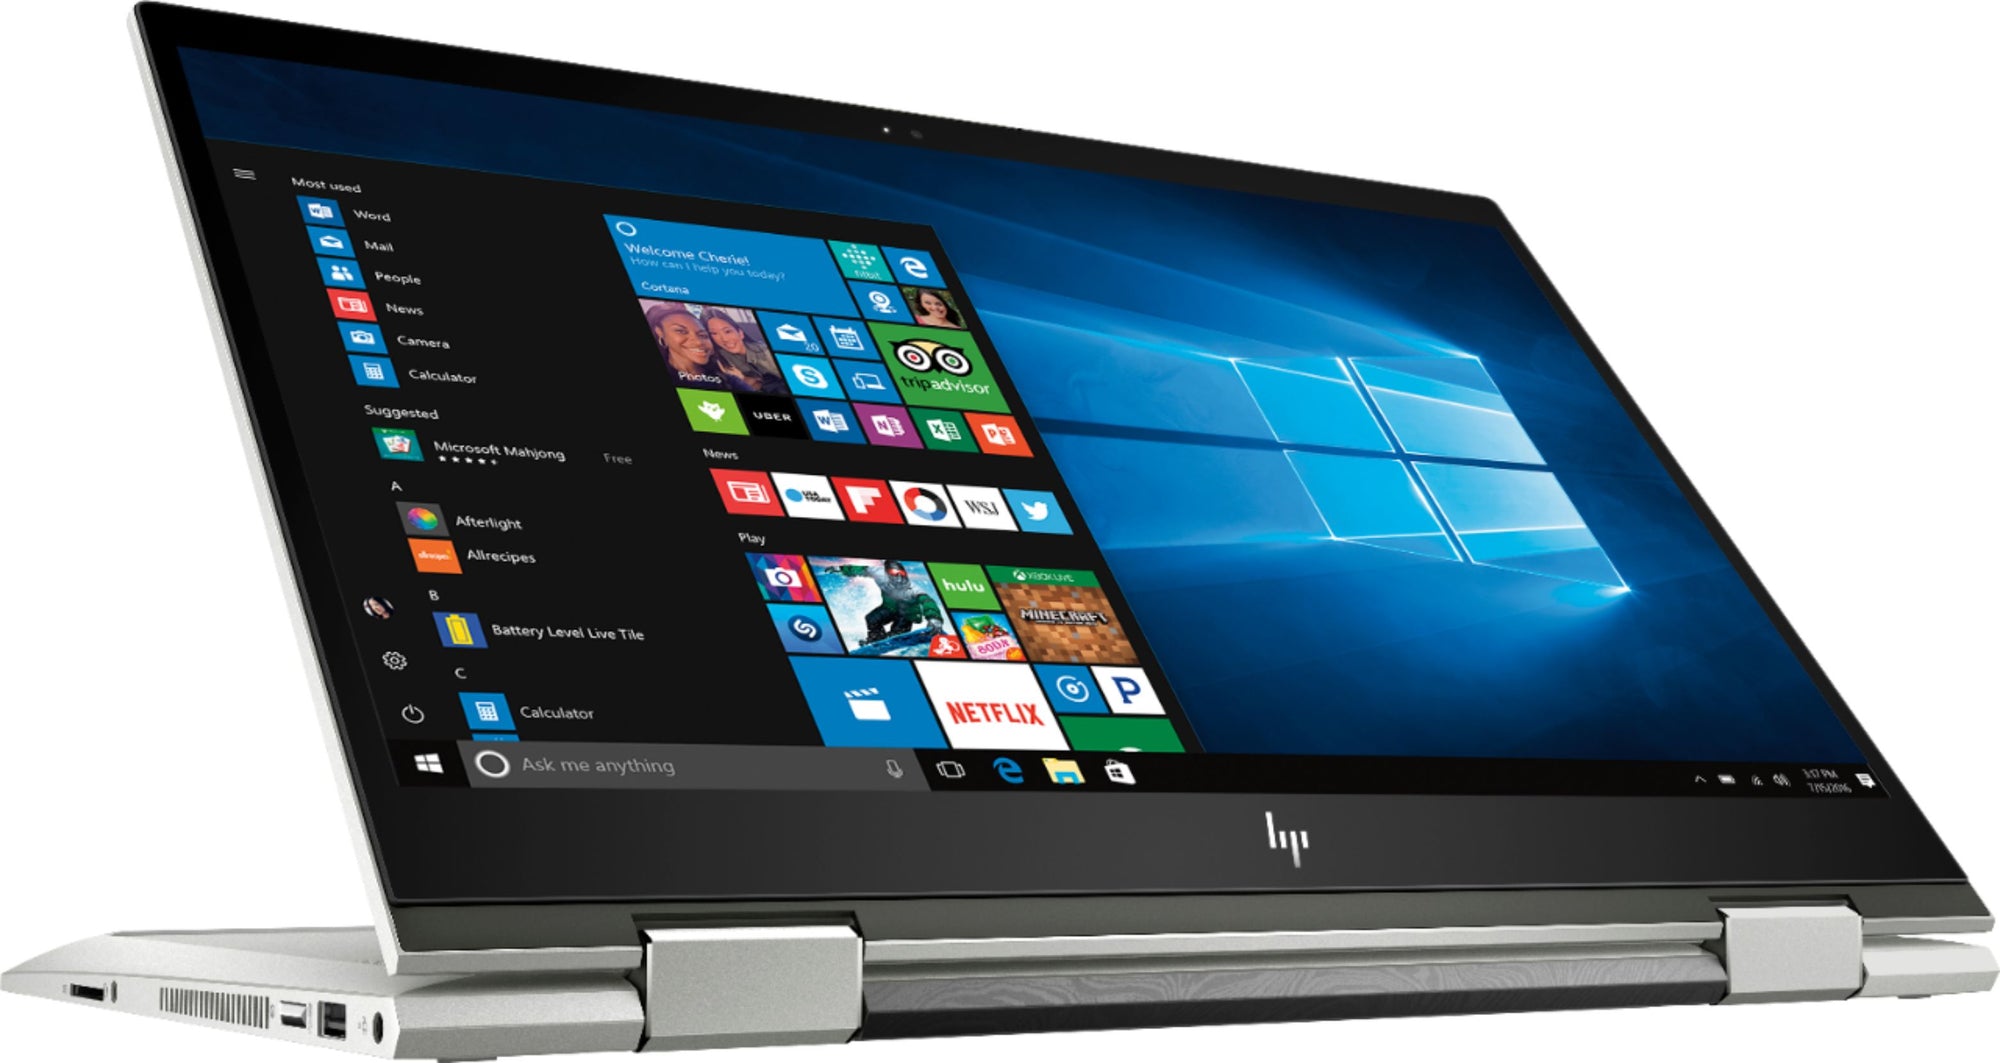 HP- 15M-CN0011DX ENVY x360 2-in-1 15.6" Touch-Screen Laptop - Intel Core i5 - 8GB Memory - 256GB Solid State Drive - Finish In Natural Silver